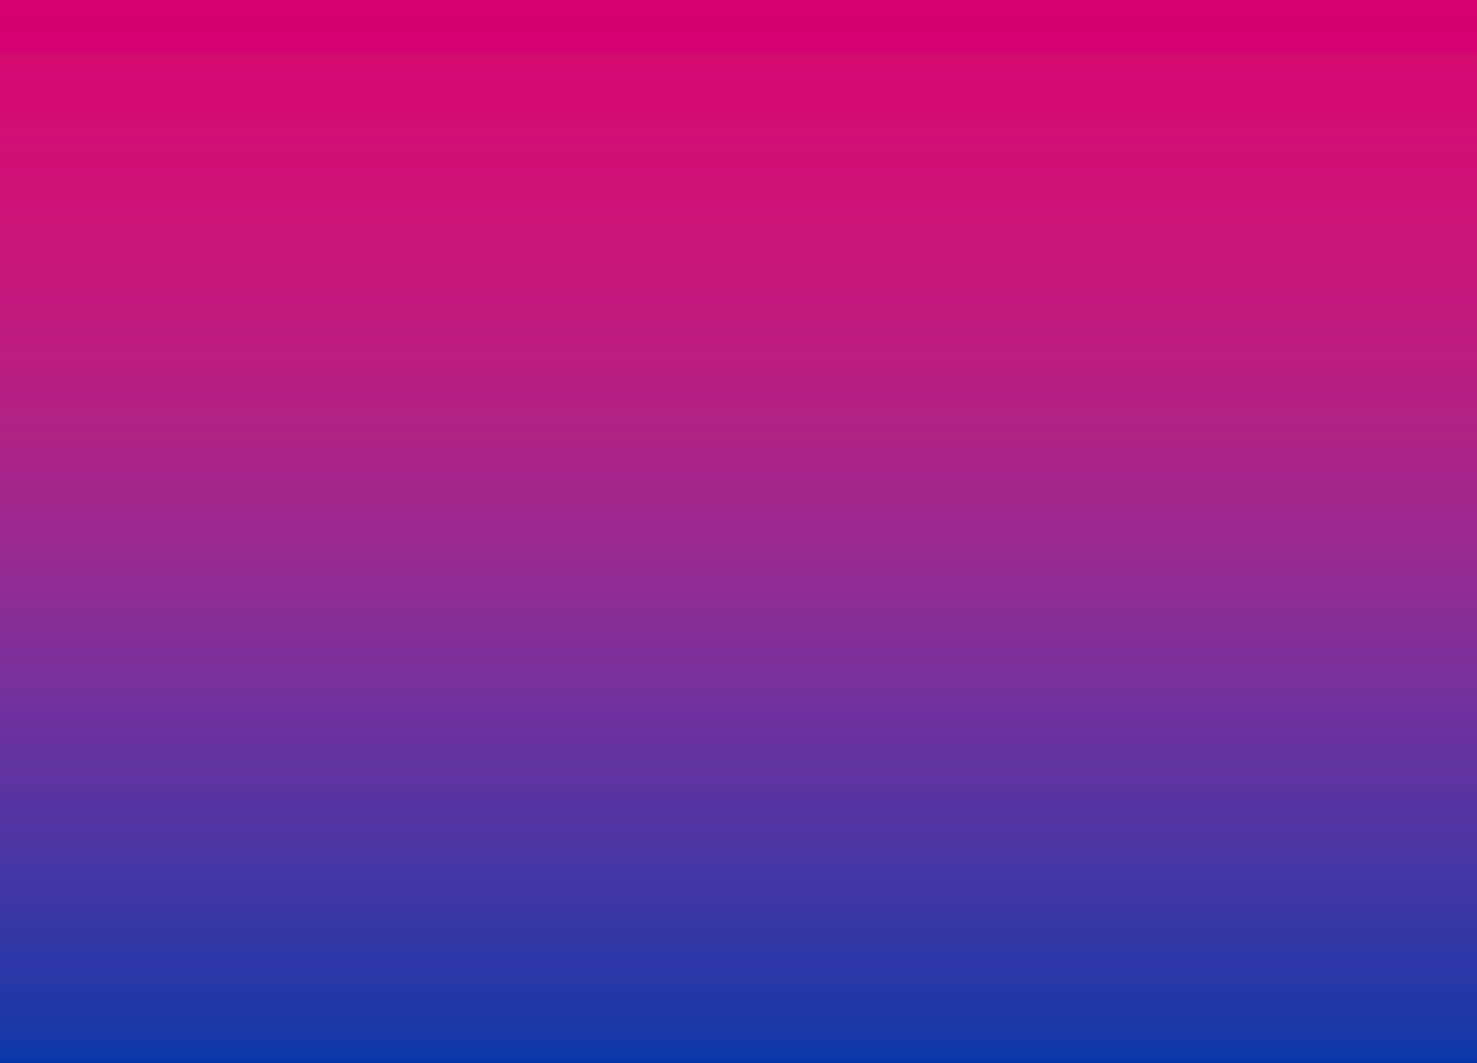 A Pink And Blue Gradient Background